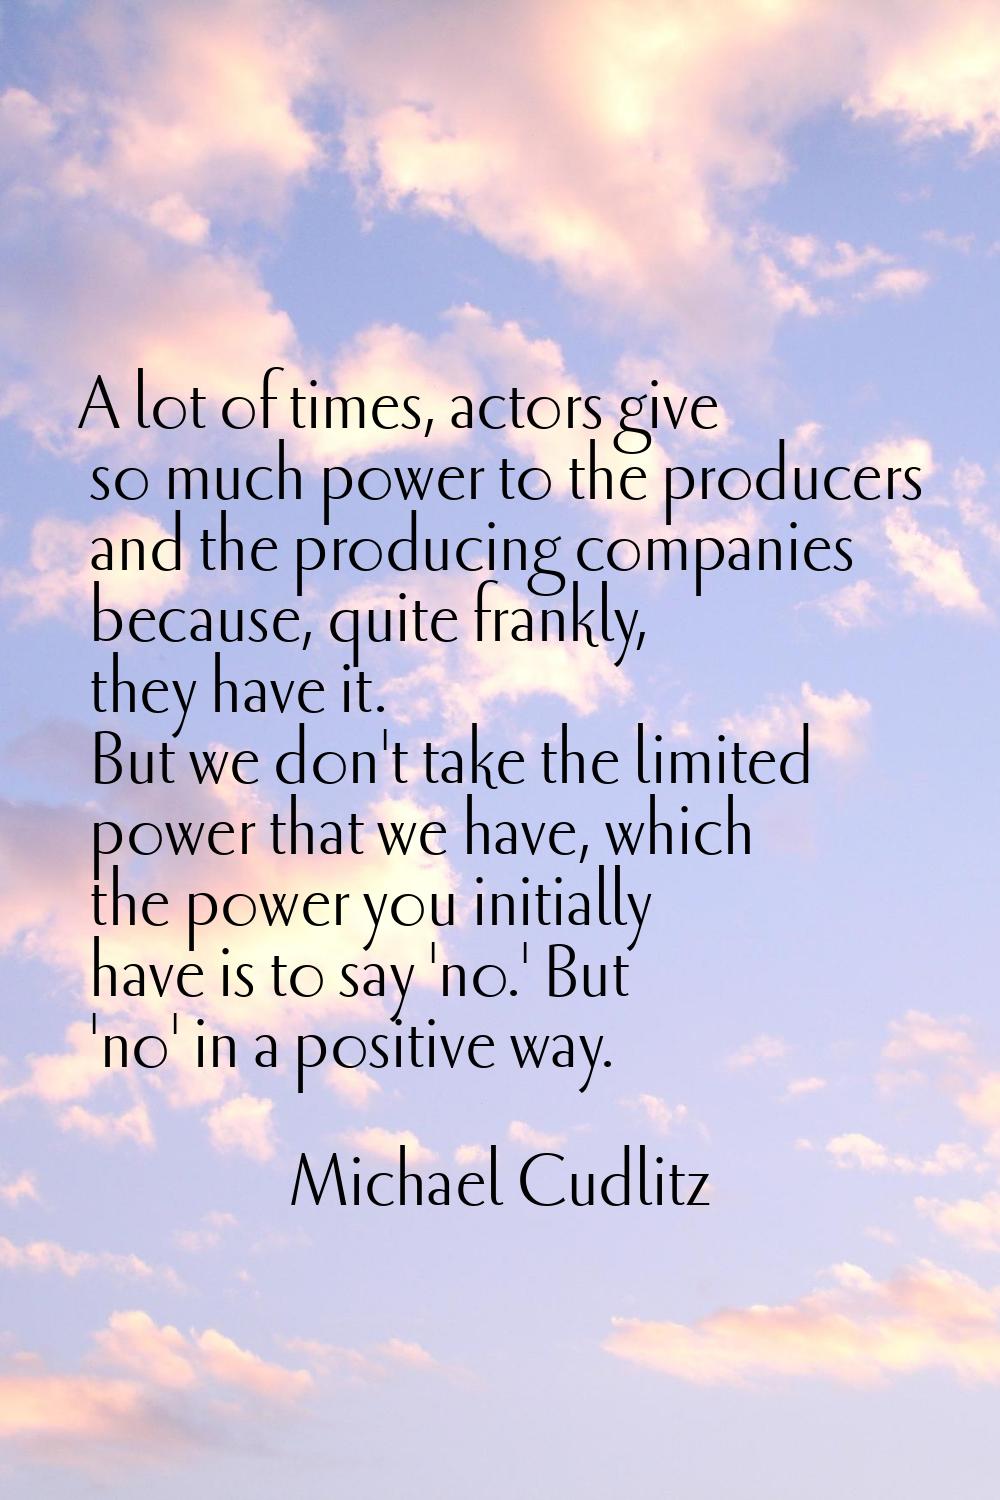 A lot of times, actors give so much power to the producers and the producing companies because, qui